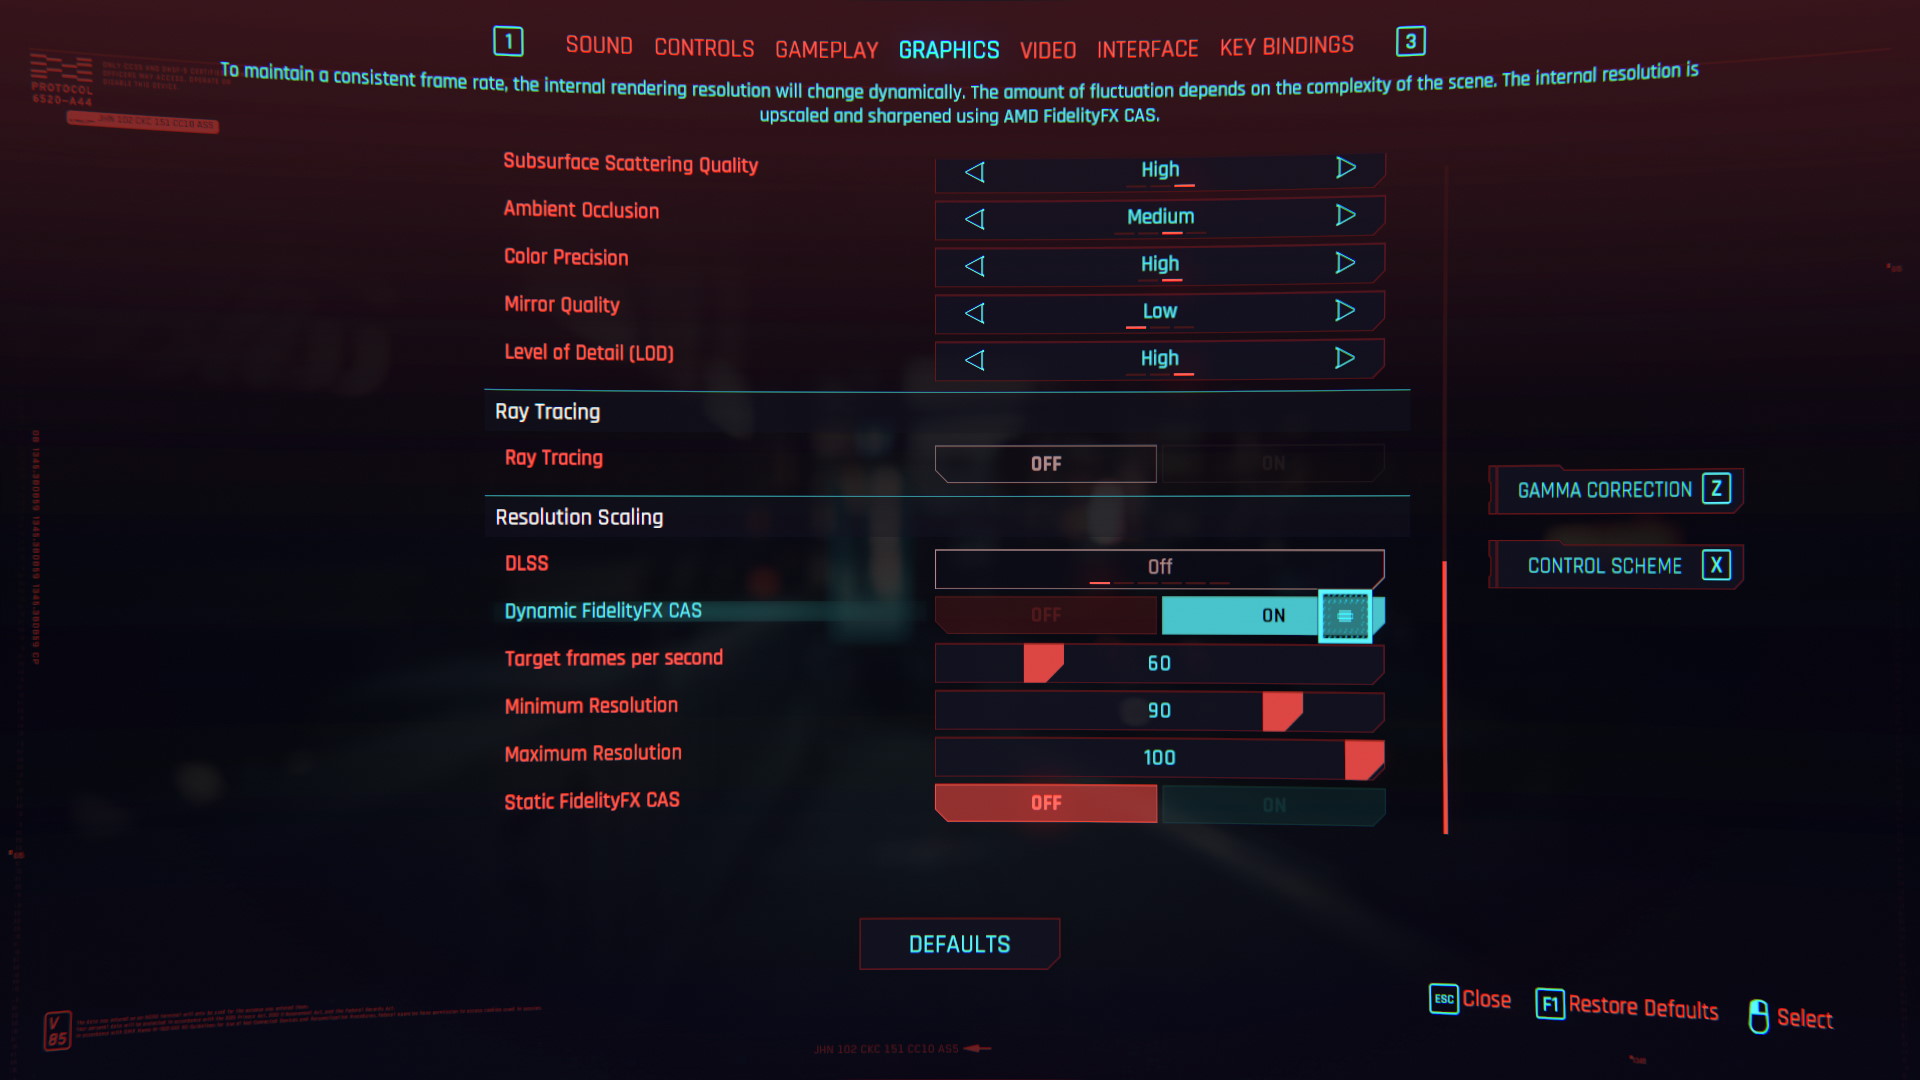 Open Cyberpunk 2077 and go to the Settings menu.
Navigate to the Graphics tab.